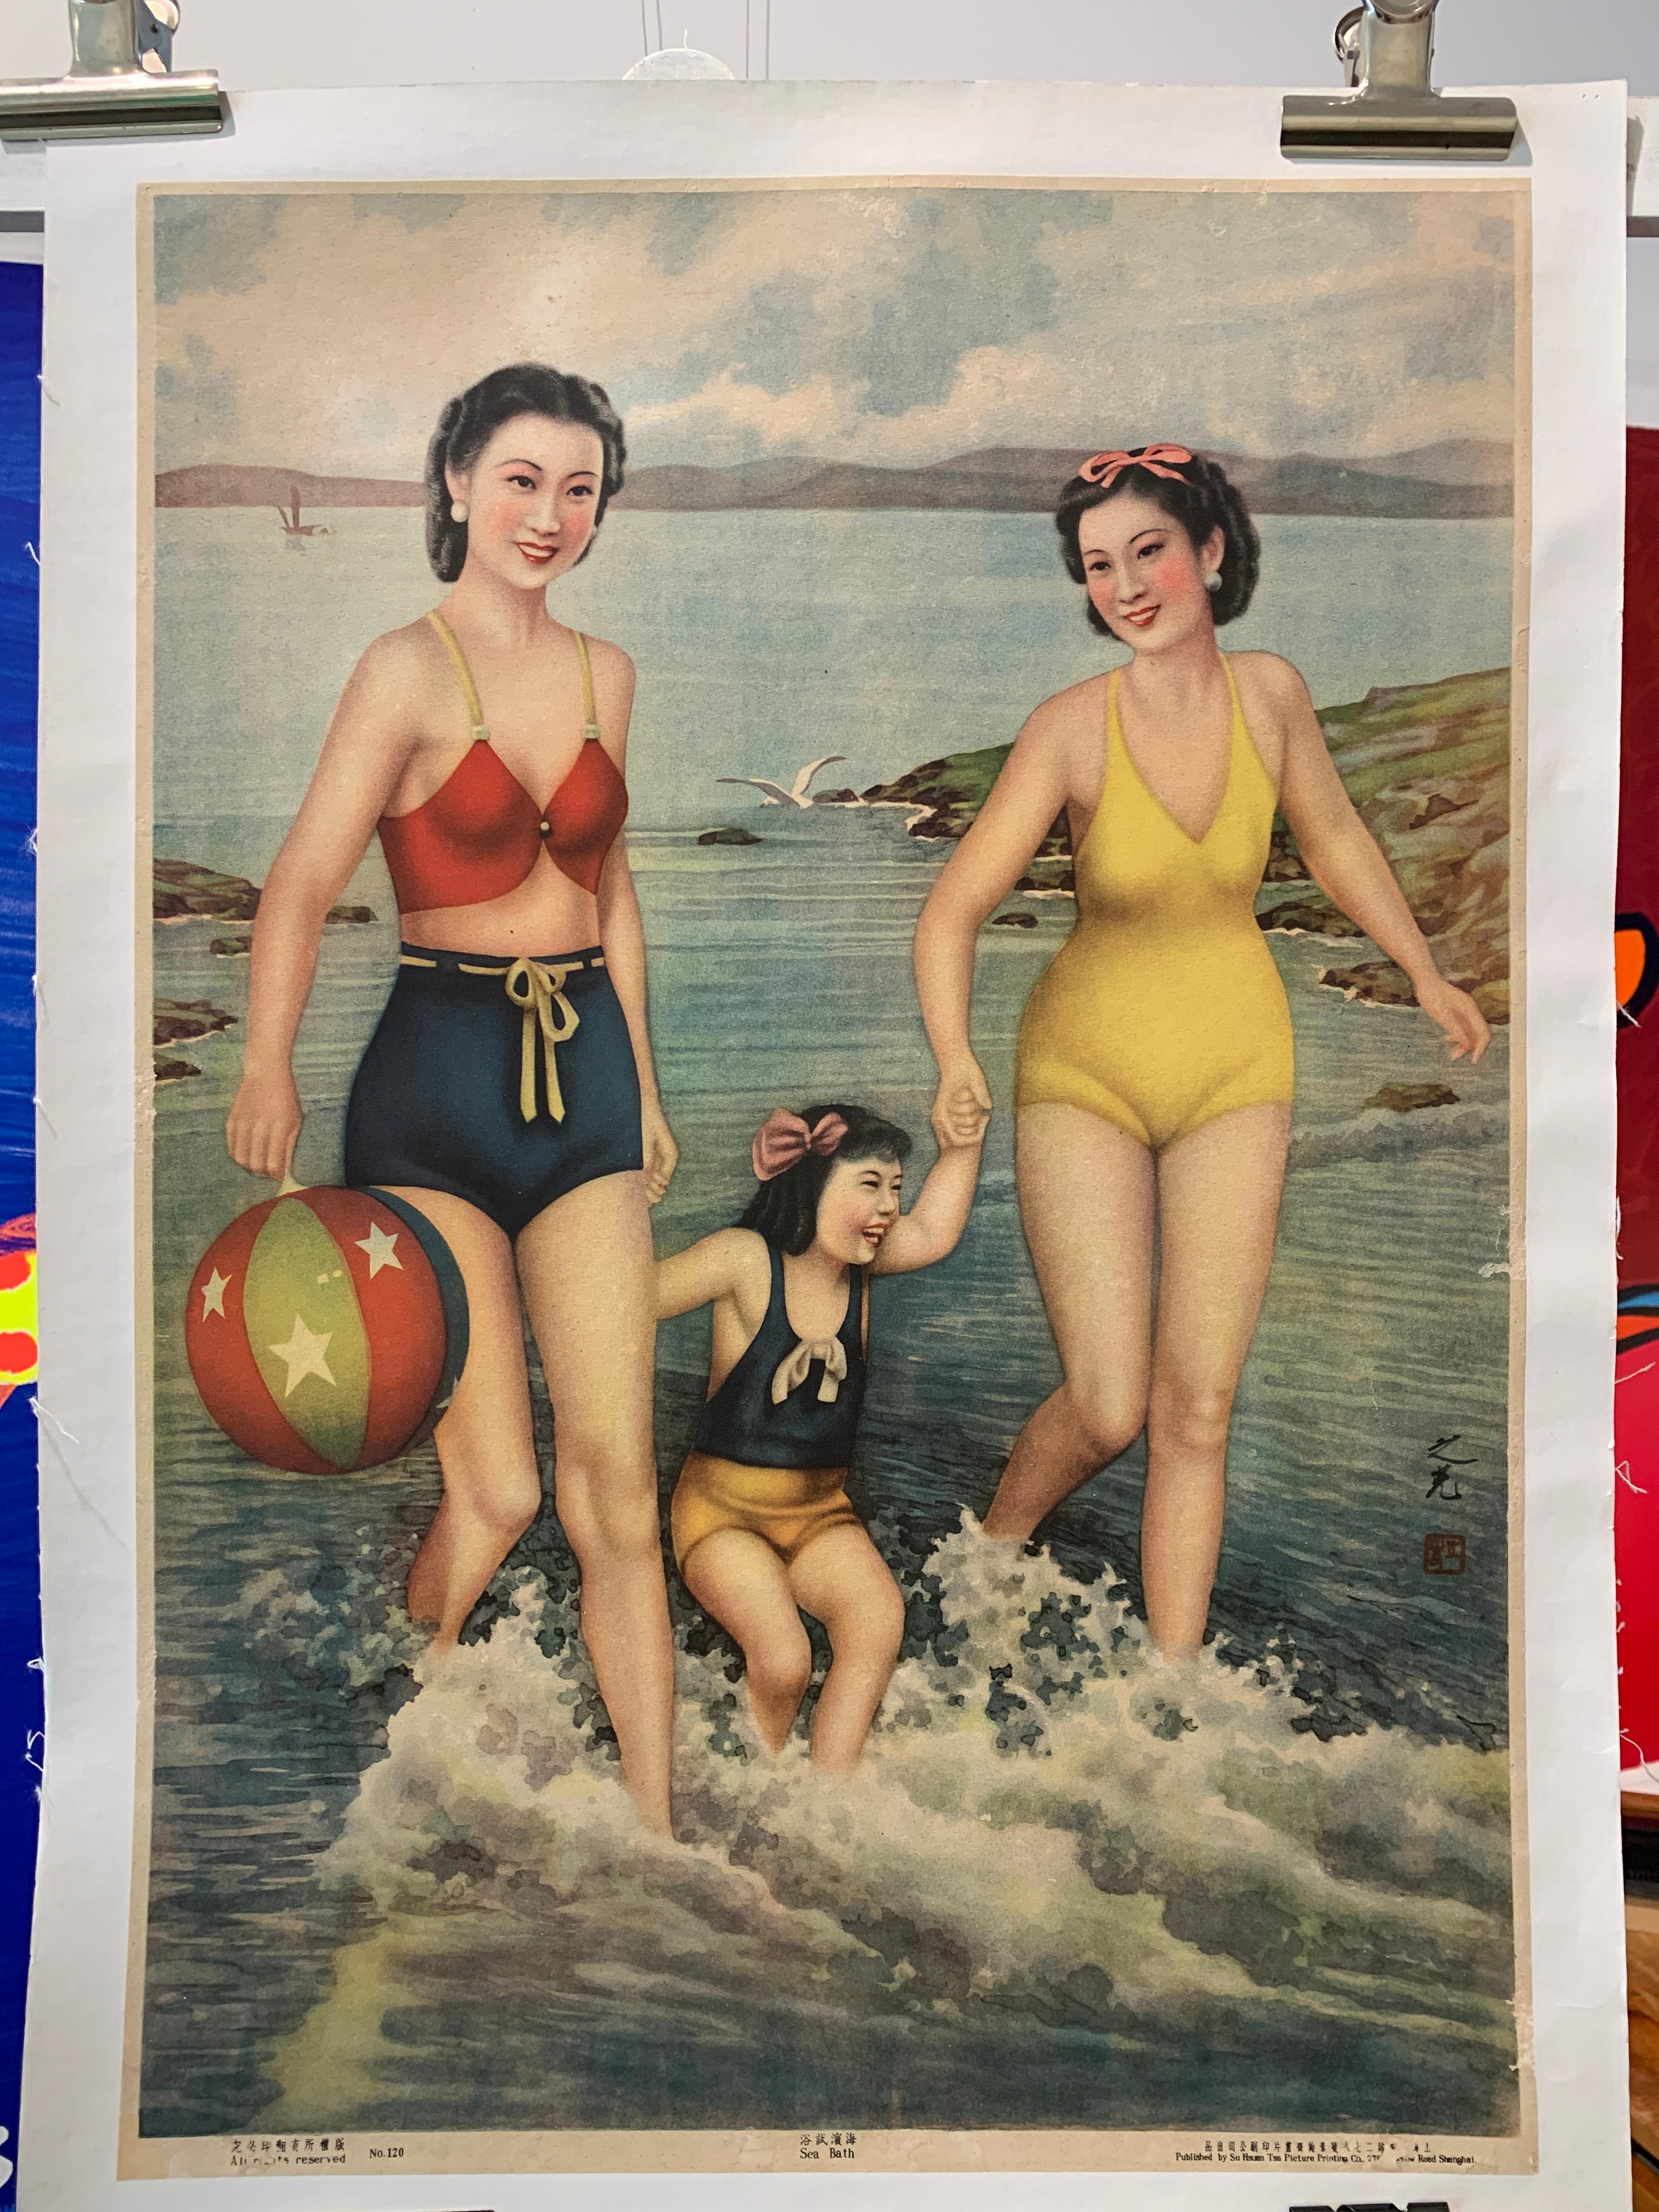 'Sea Bath' Original Vintage Poster, Shanghai, Circa. 1940's

This is an original vintage poster, published by Su Hsuen Tsa Printing Co. Road Shanghai

This poster has been linen backed for preservation, the condition is good

Artist: Unknown
Year: